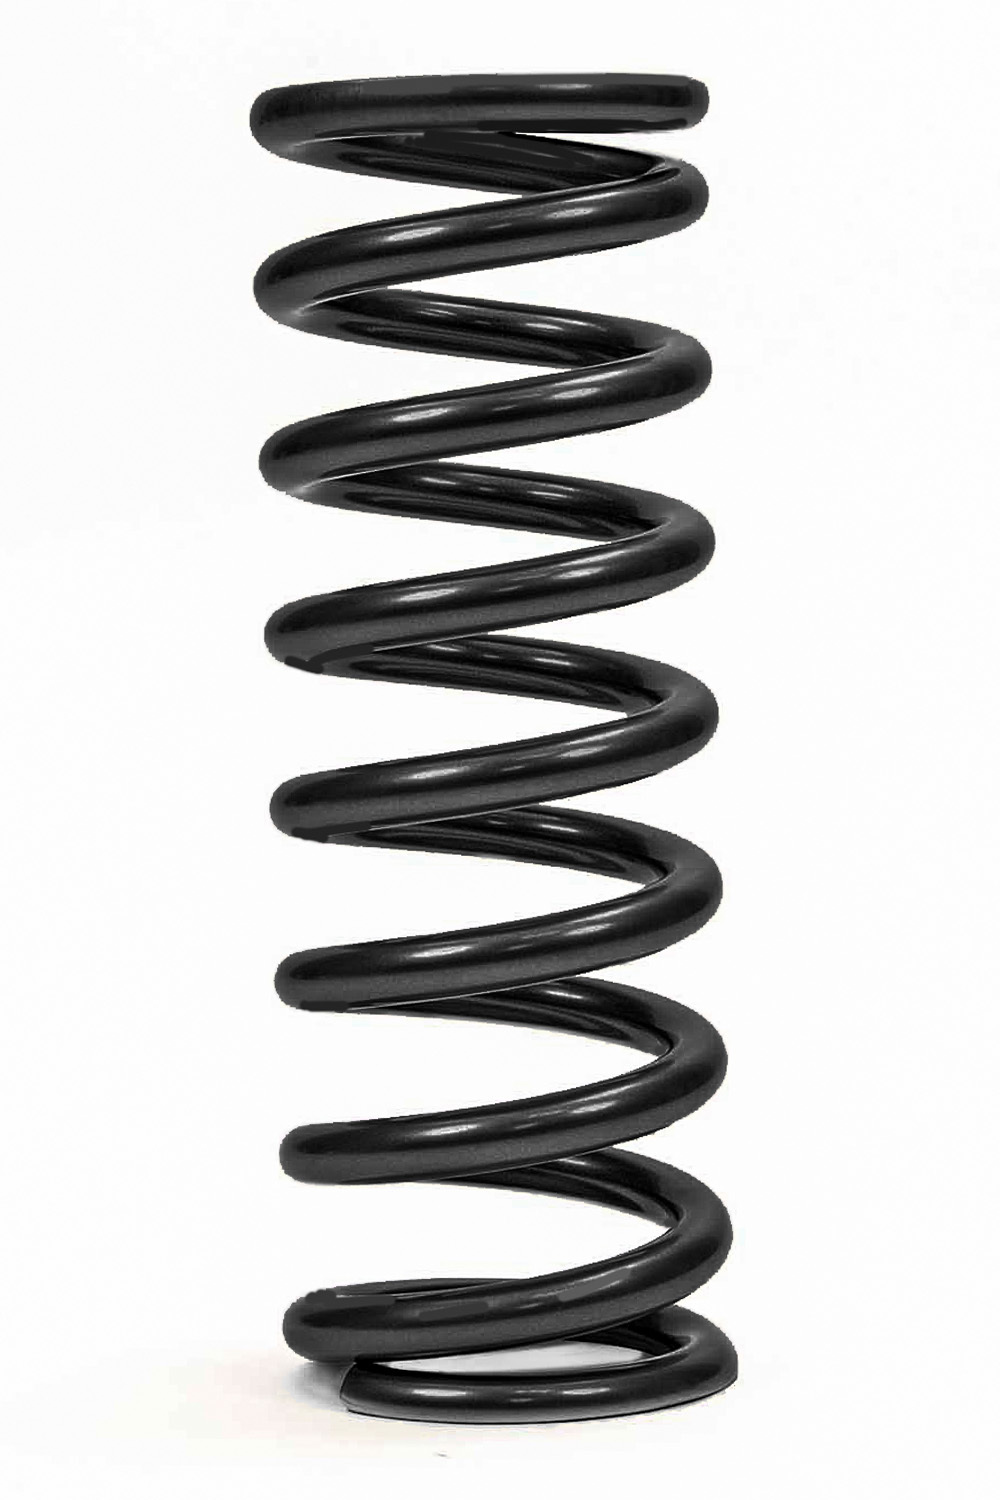 QA1 10HT175B Coil Spring, Coil-Over, 2.500 in ID, 10.000 in Length, 175 lb/in Spring Rate, Steel, Black Powder Coat, Each